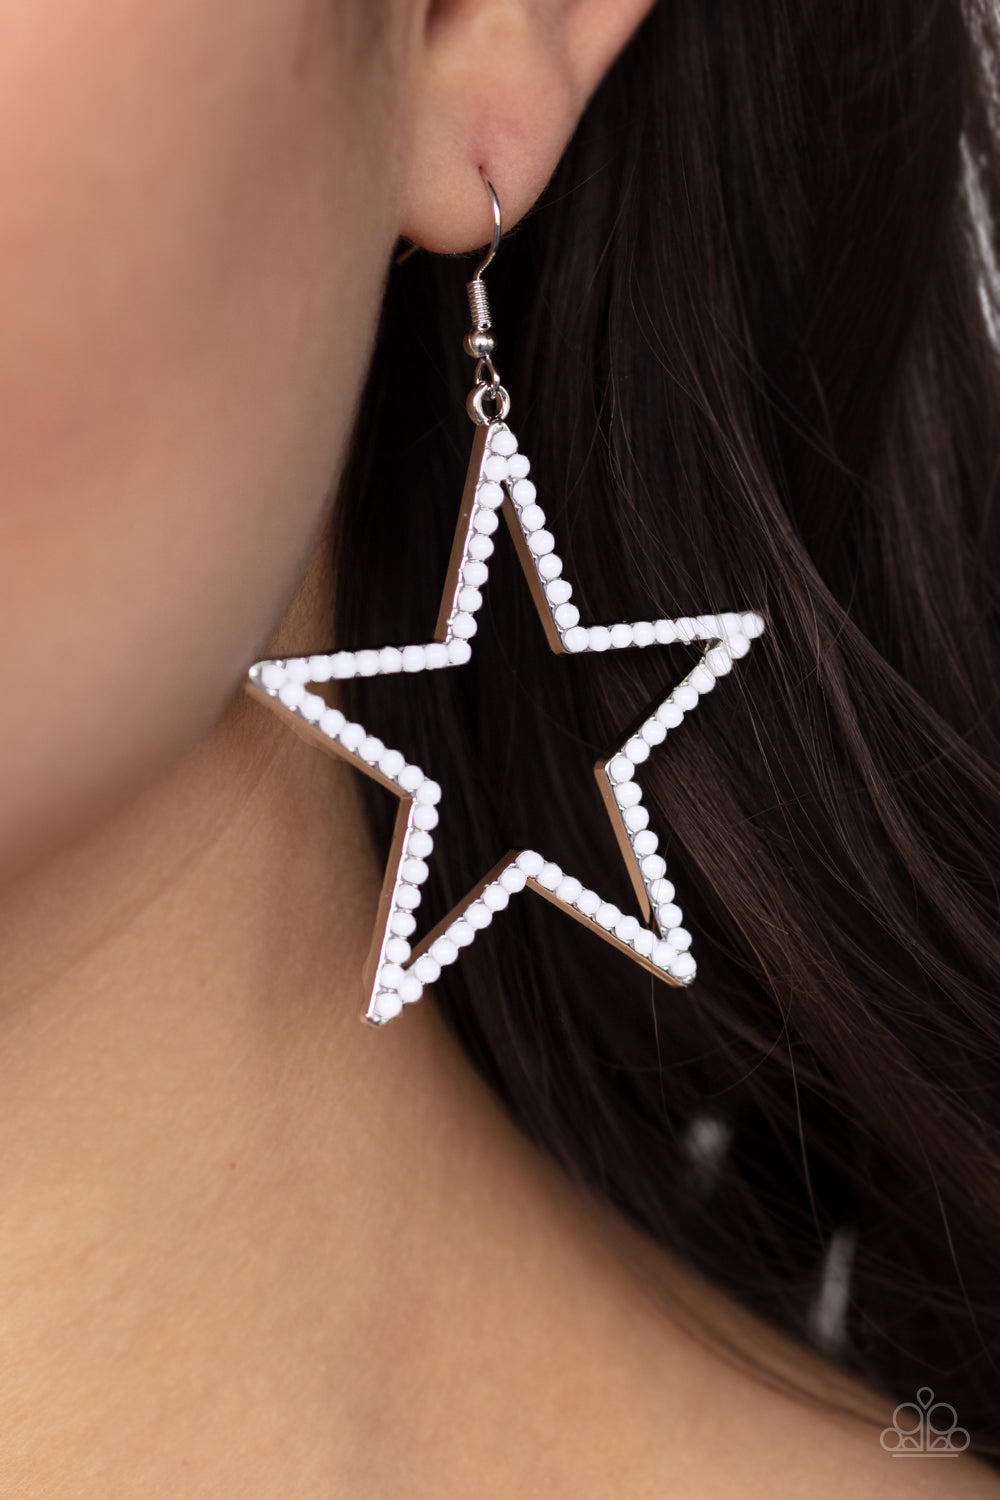 Count Your Stars White Earring